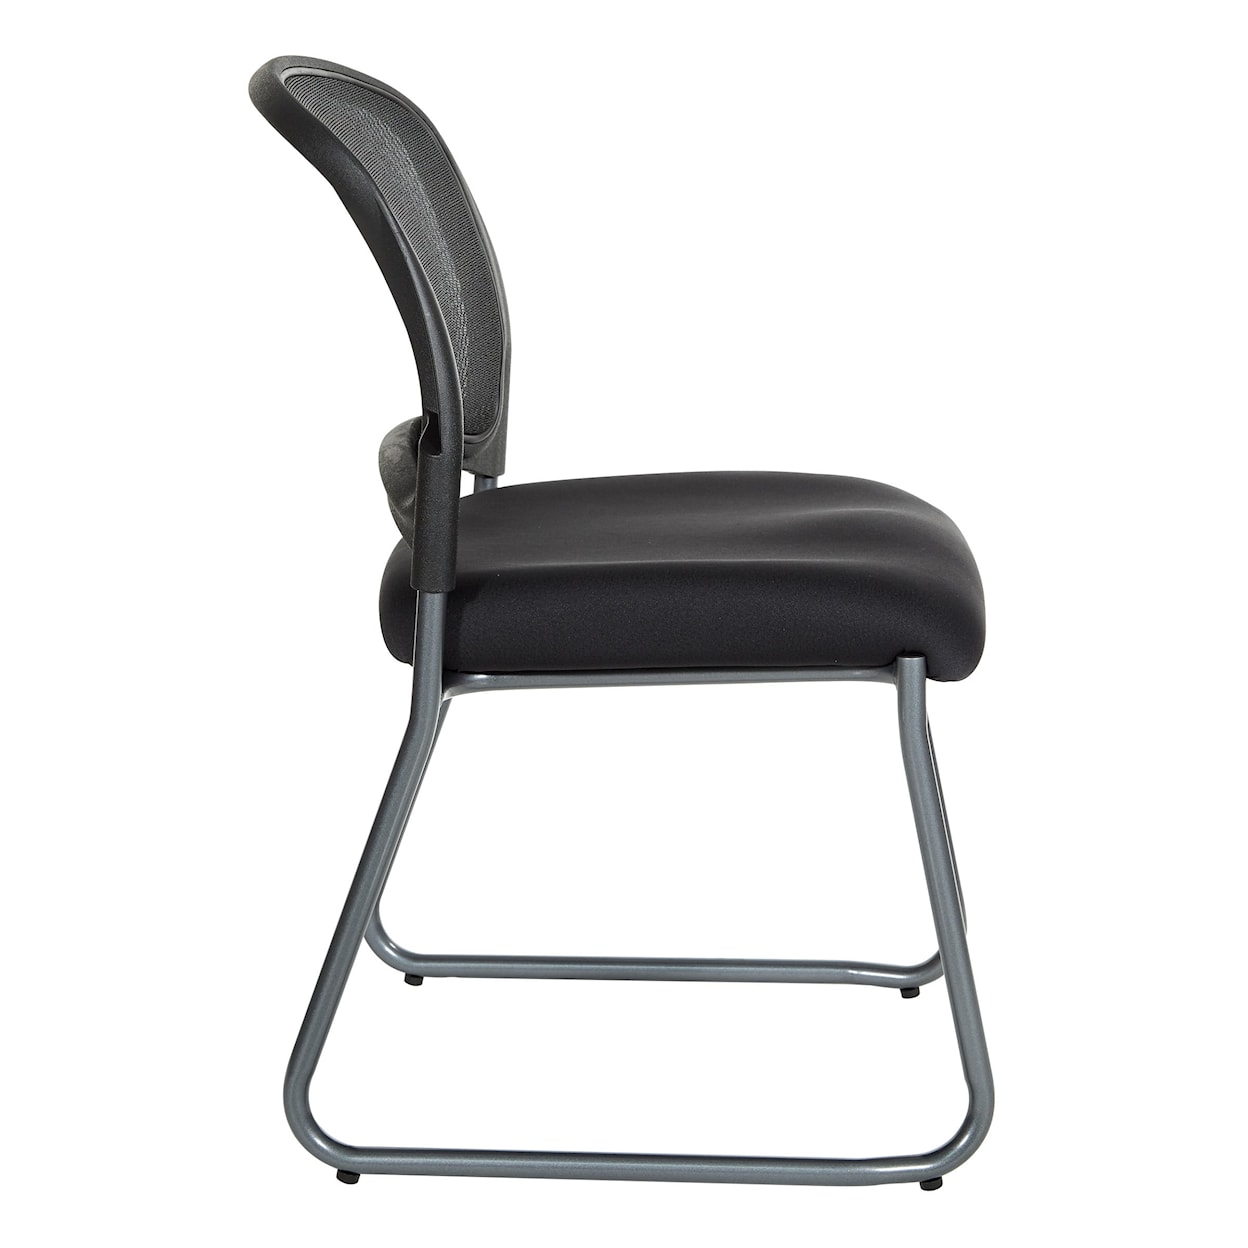 Office Star ProGrid® Chair